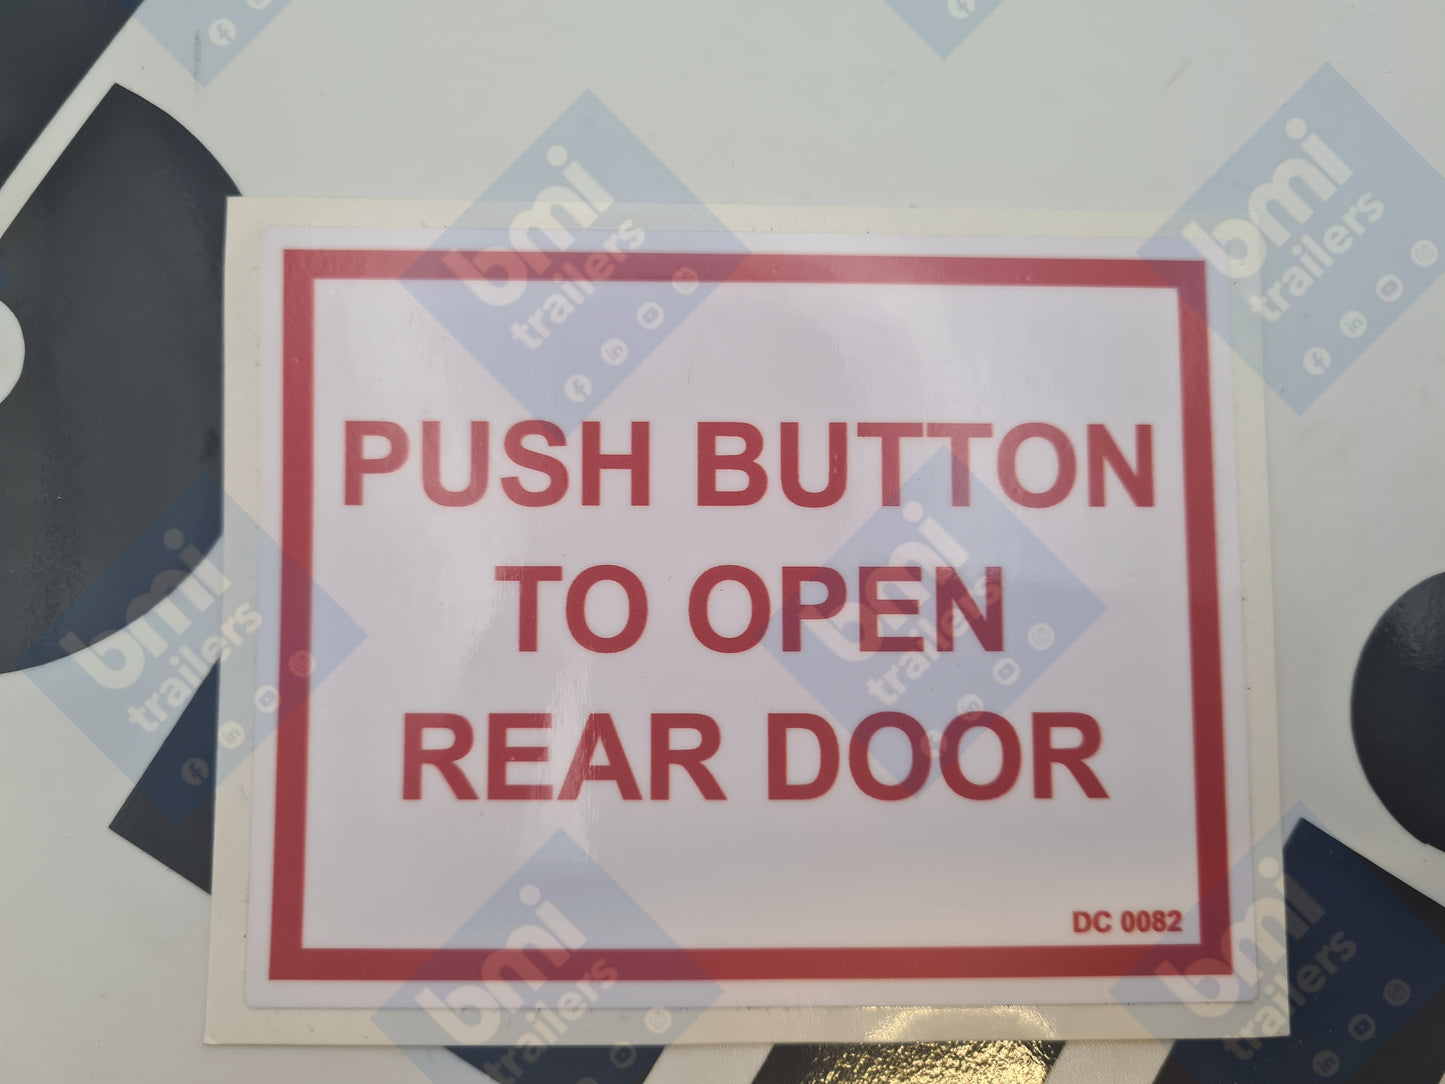 DC 0082 ----- Push Button to open rear door (80w x 100h x 1c) Decal